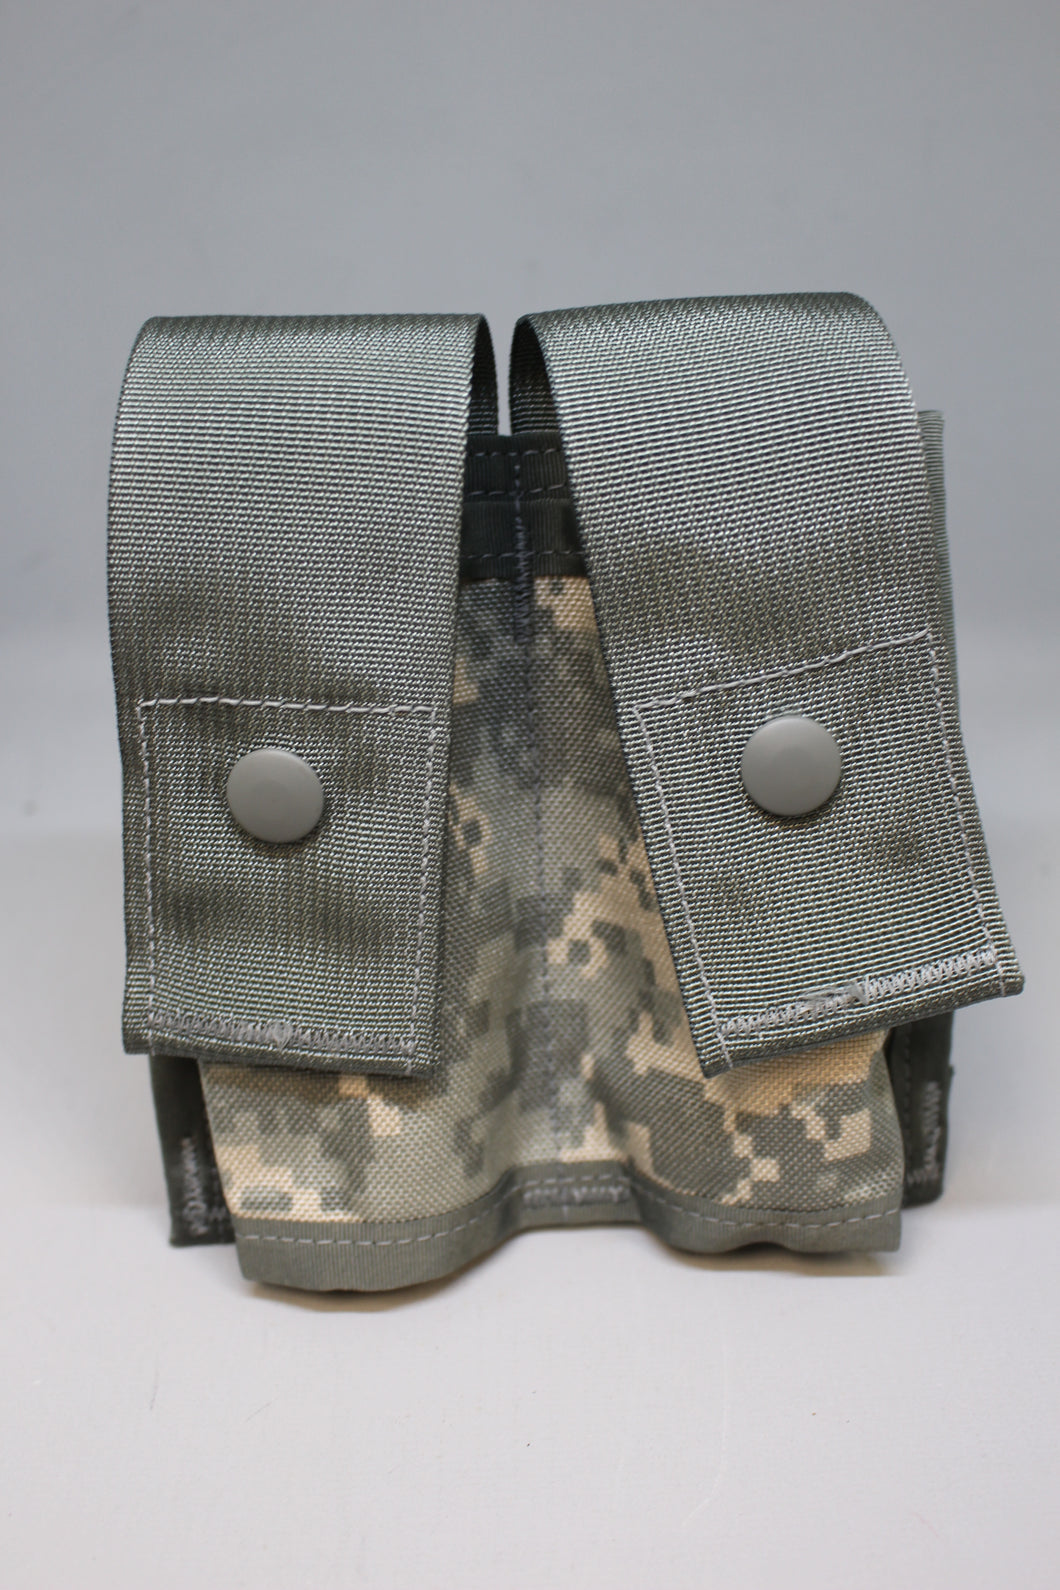 Molle II ACU 40mm Pyrotechnic Pouch (Double) - 8465-01-524-7636 - Used